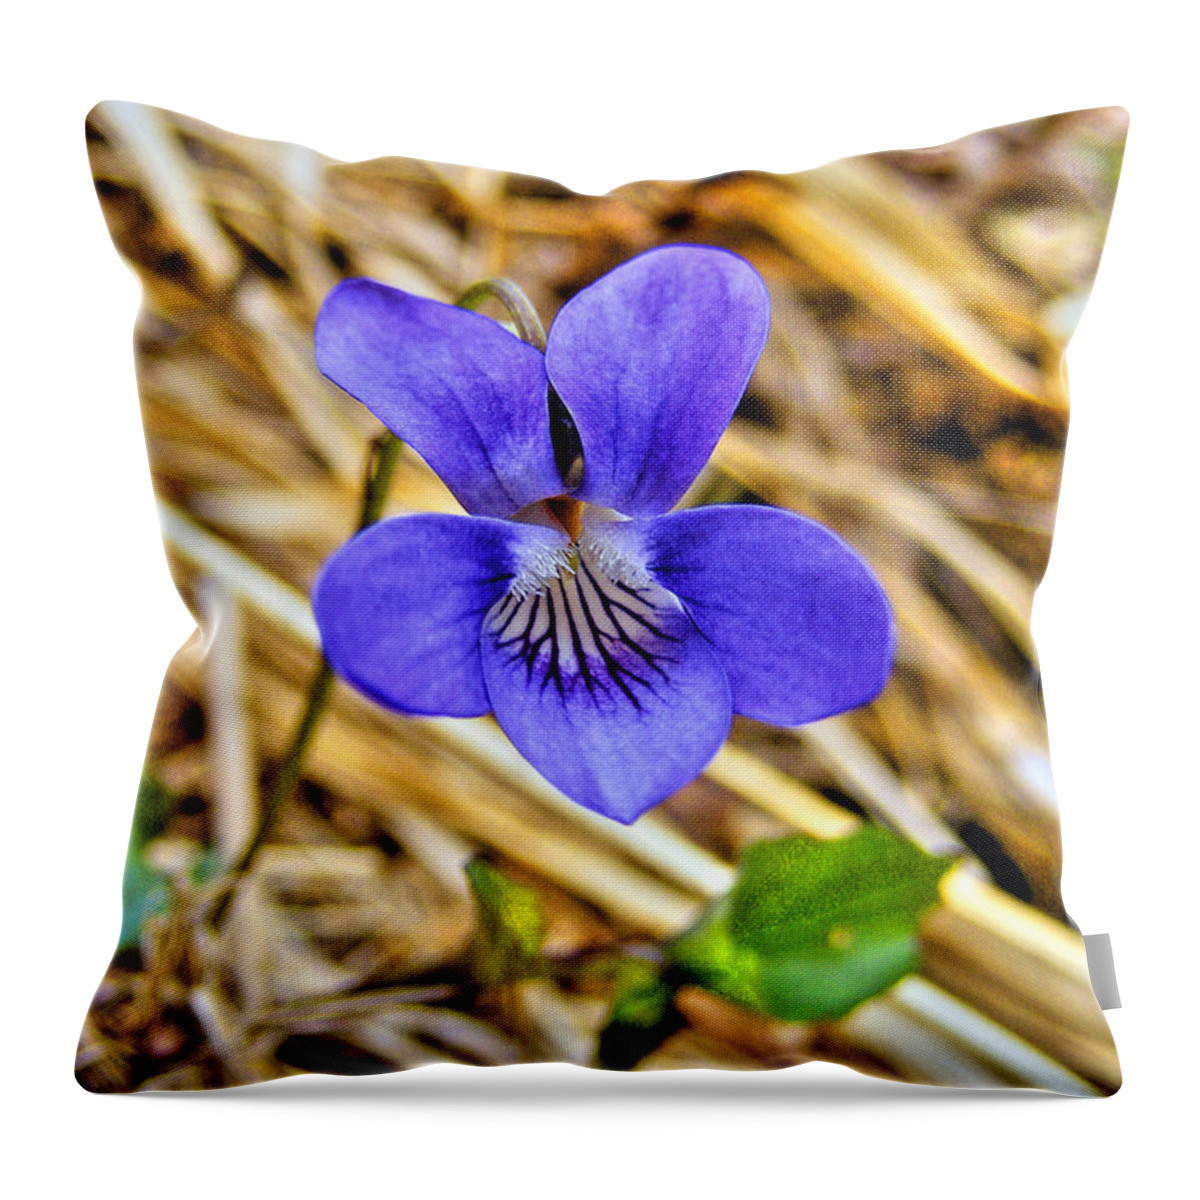 Violet Throw Pillow featuring the photograph Violet by Nina Ficur Feenan